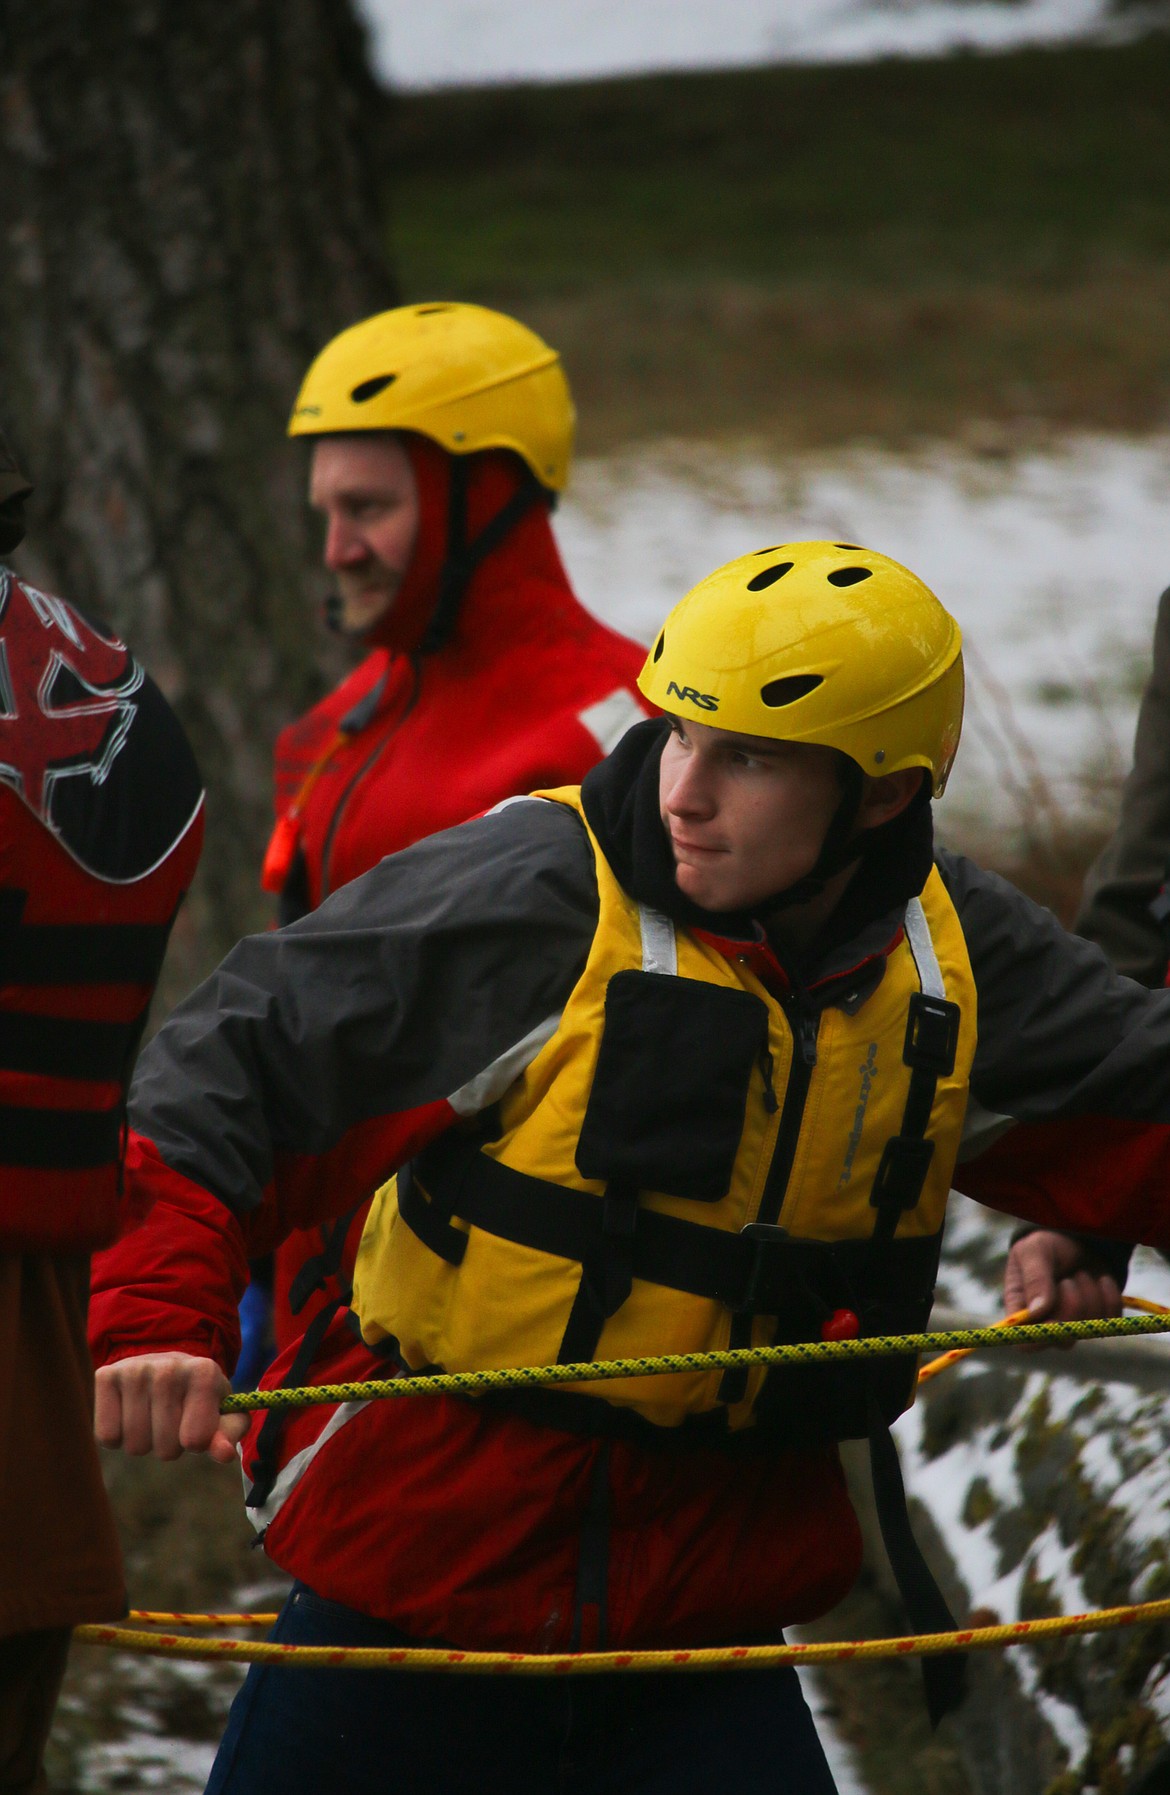 The firefighters took turns practicing different rescue roles, both on land, on the ice, and in the water.